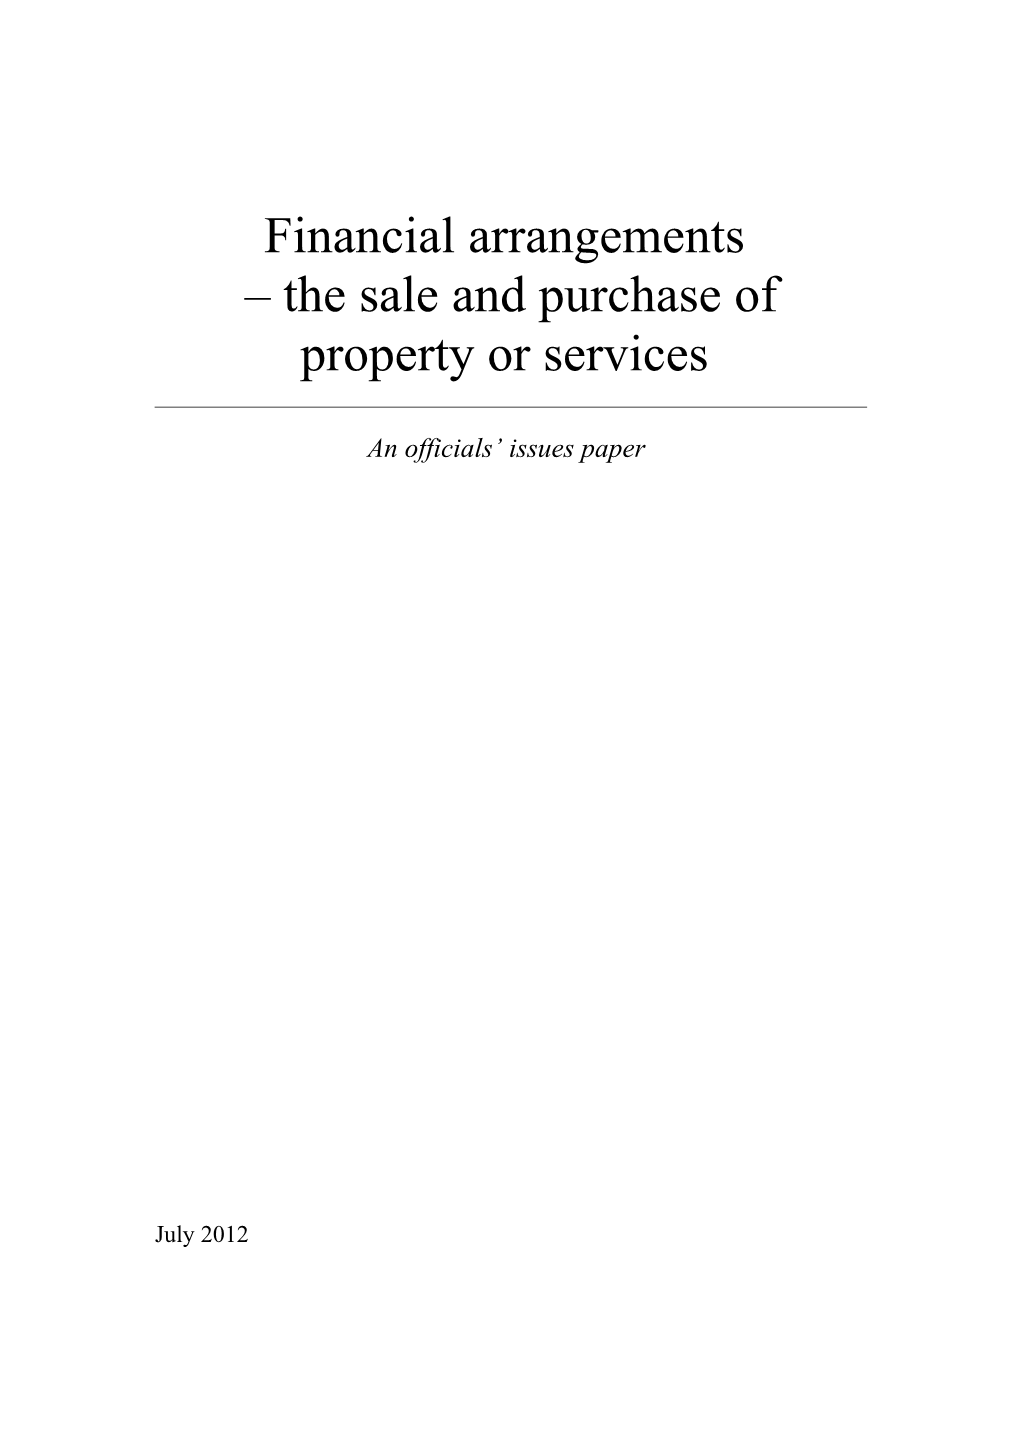 Financial Arrangements - the Sale and Purchase of Property Or Services